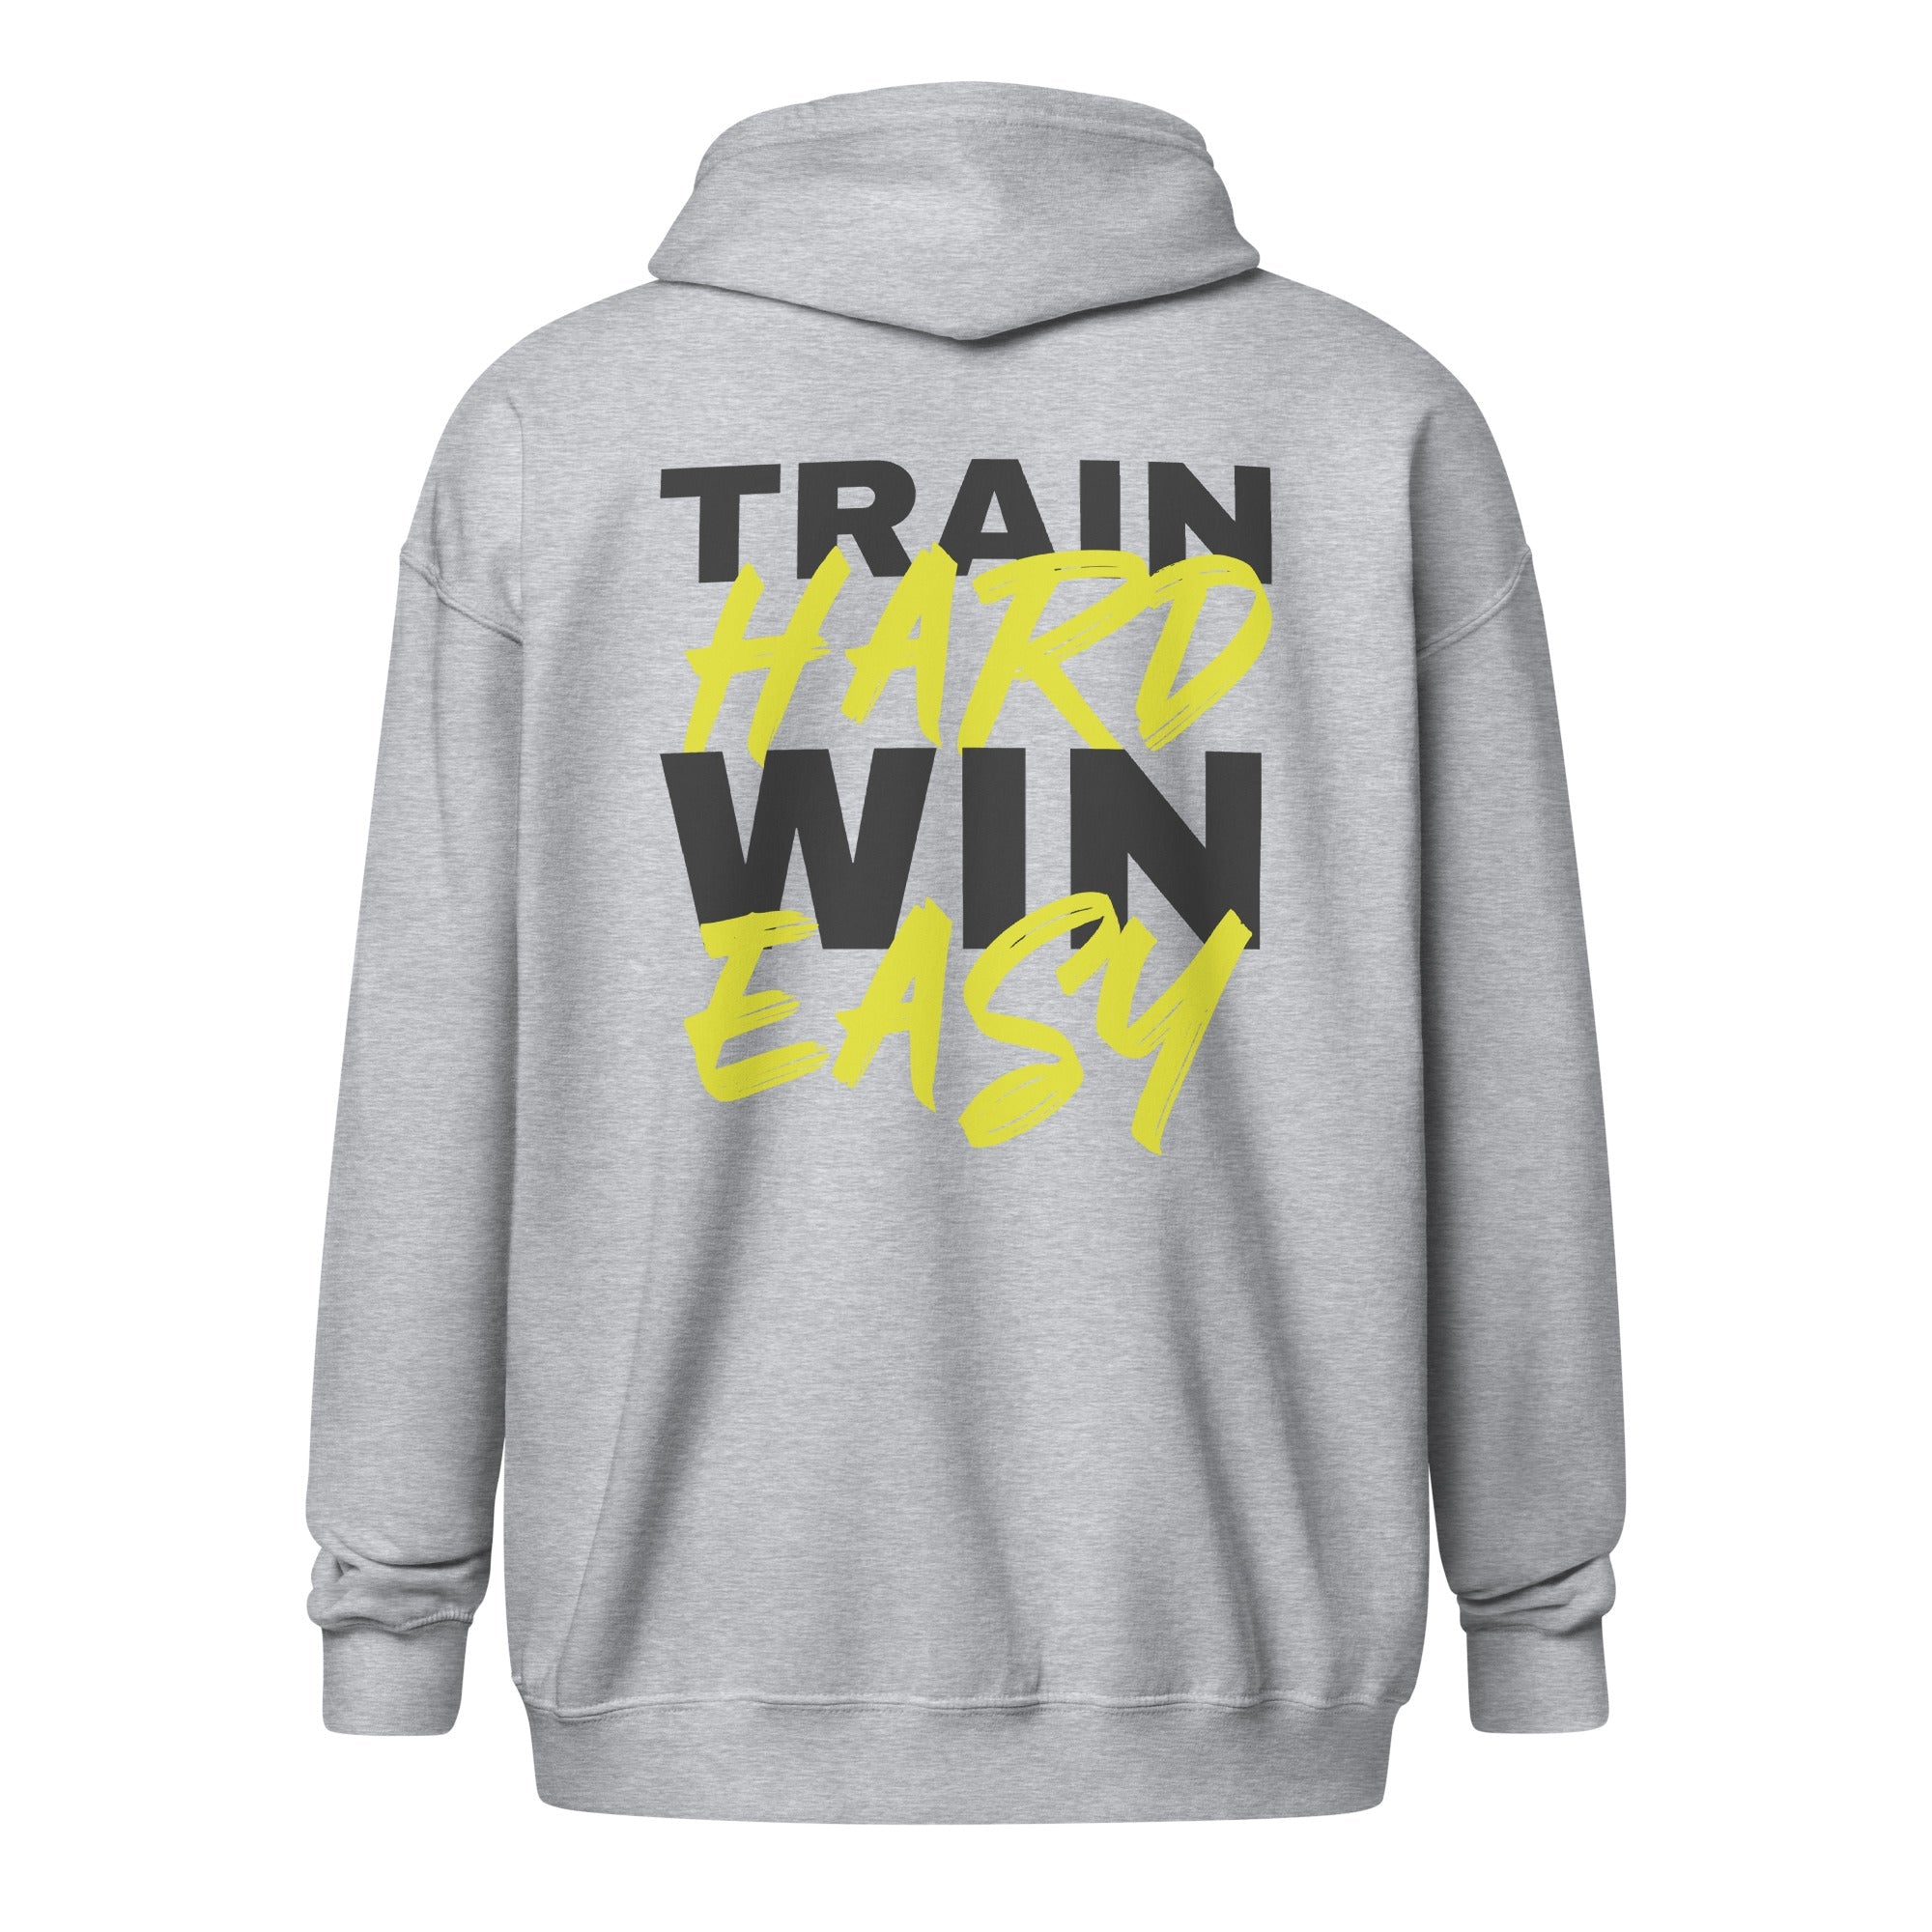 Train Hard Win Easy | Front and Back Printed Sports Zip Hoodie for Women